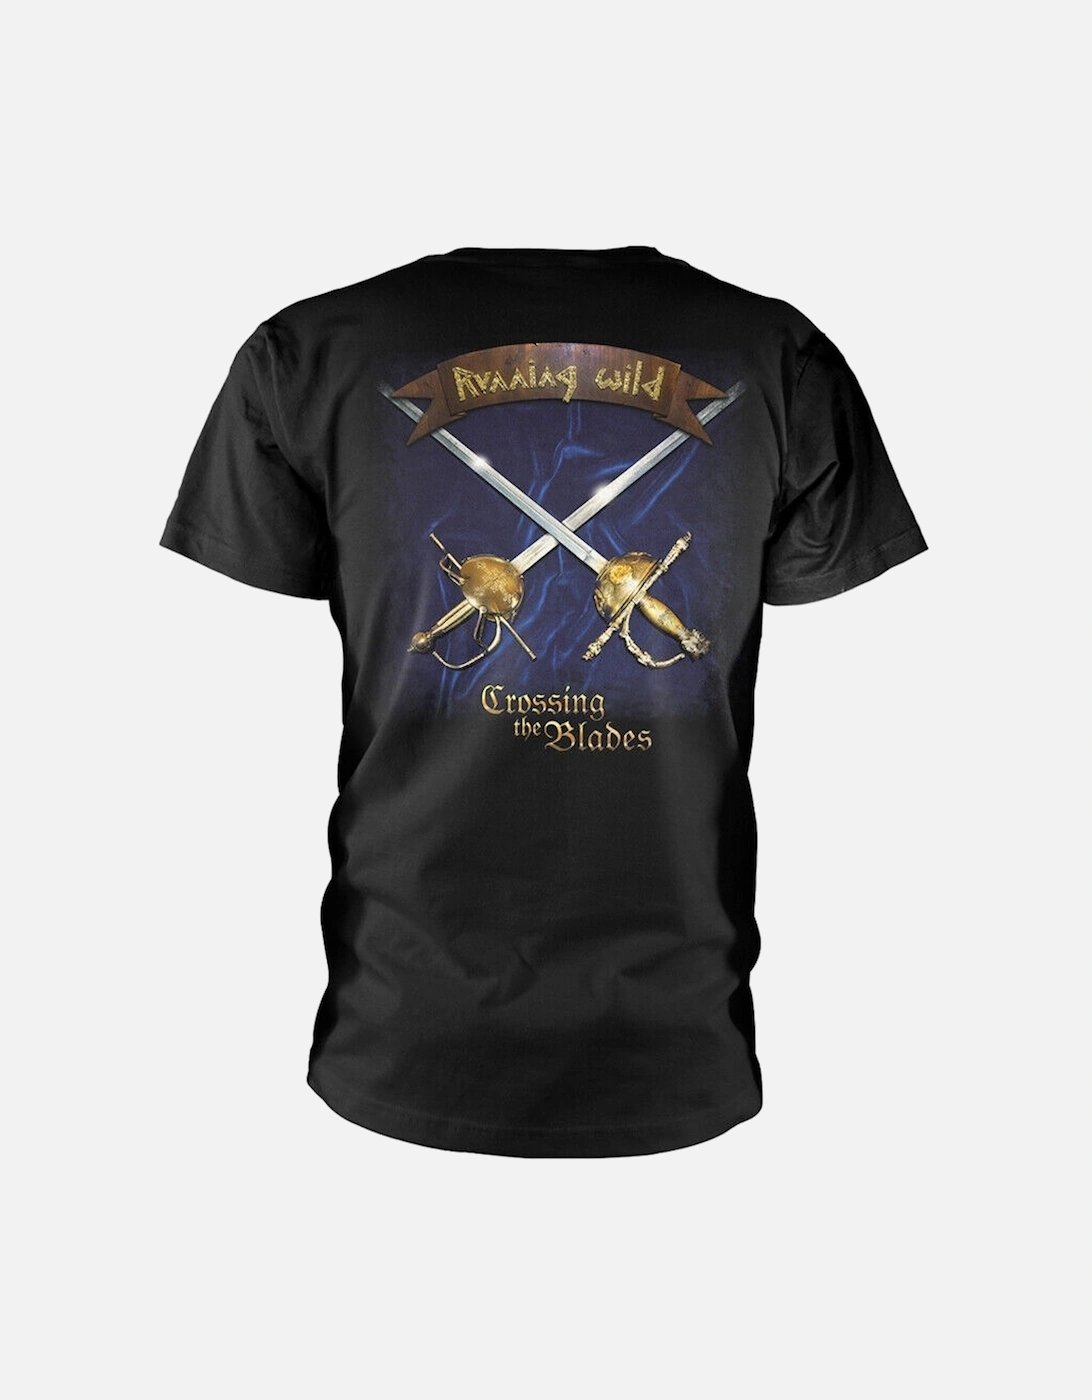 Unisex Adult Crossing The Blades T-Shirt